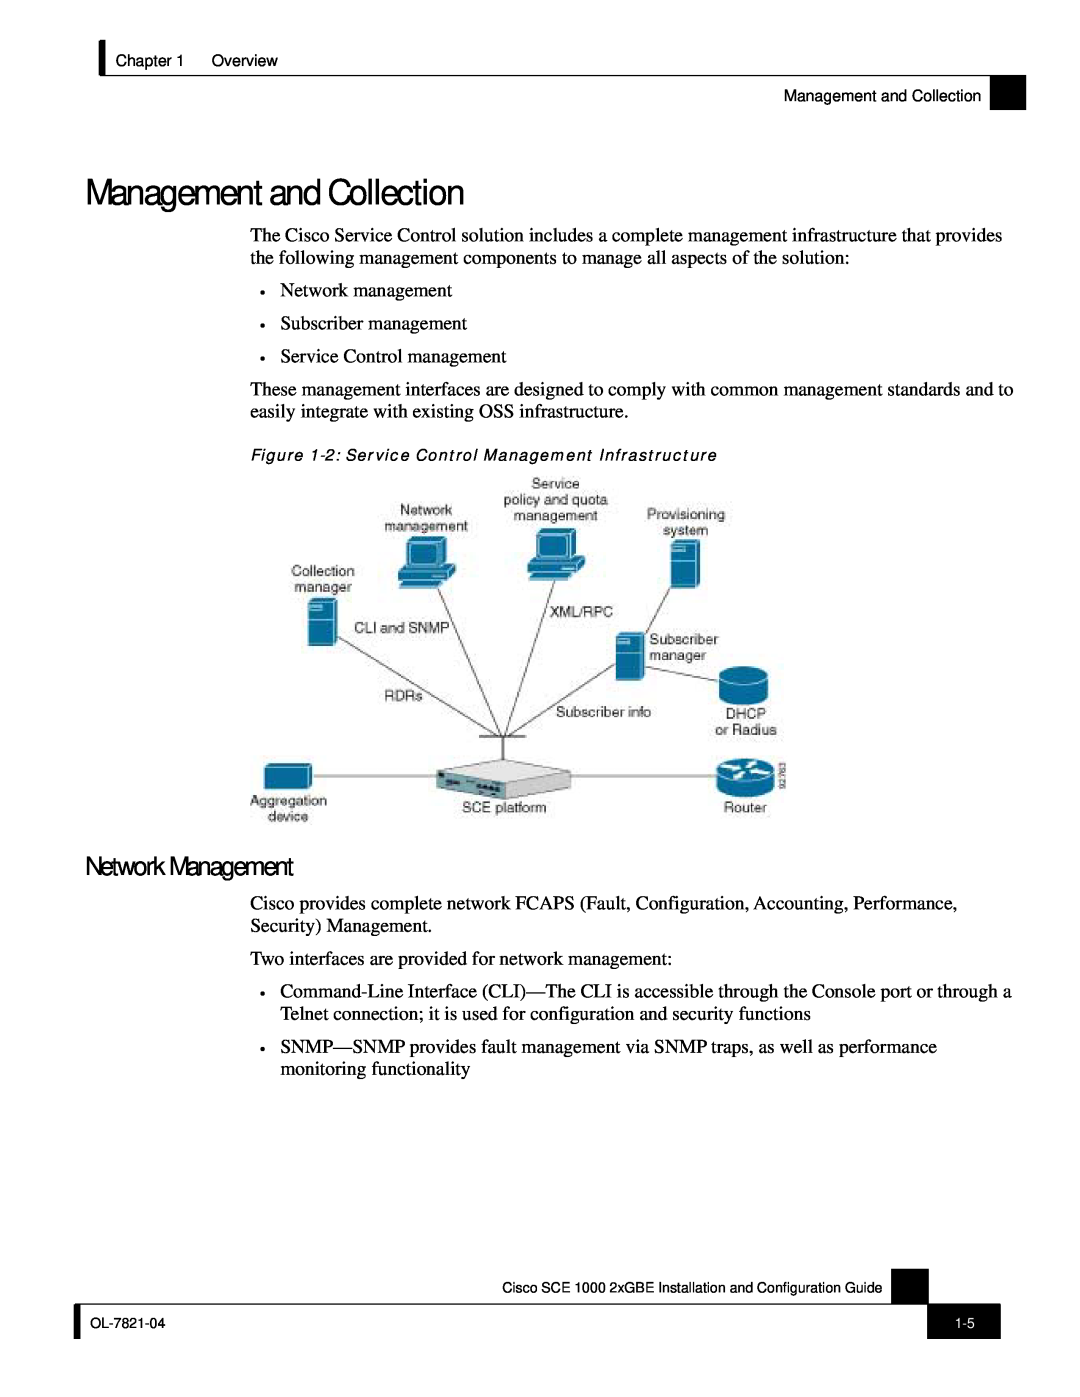 Cisco Systems SCE 1000 2xGBE, OL-7821-04 manual Management and Collection, Network Management 